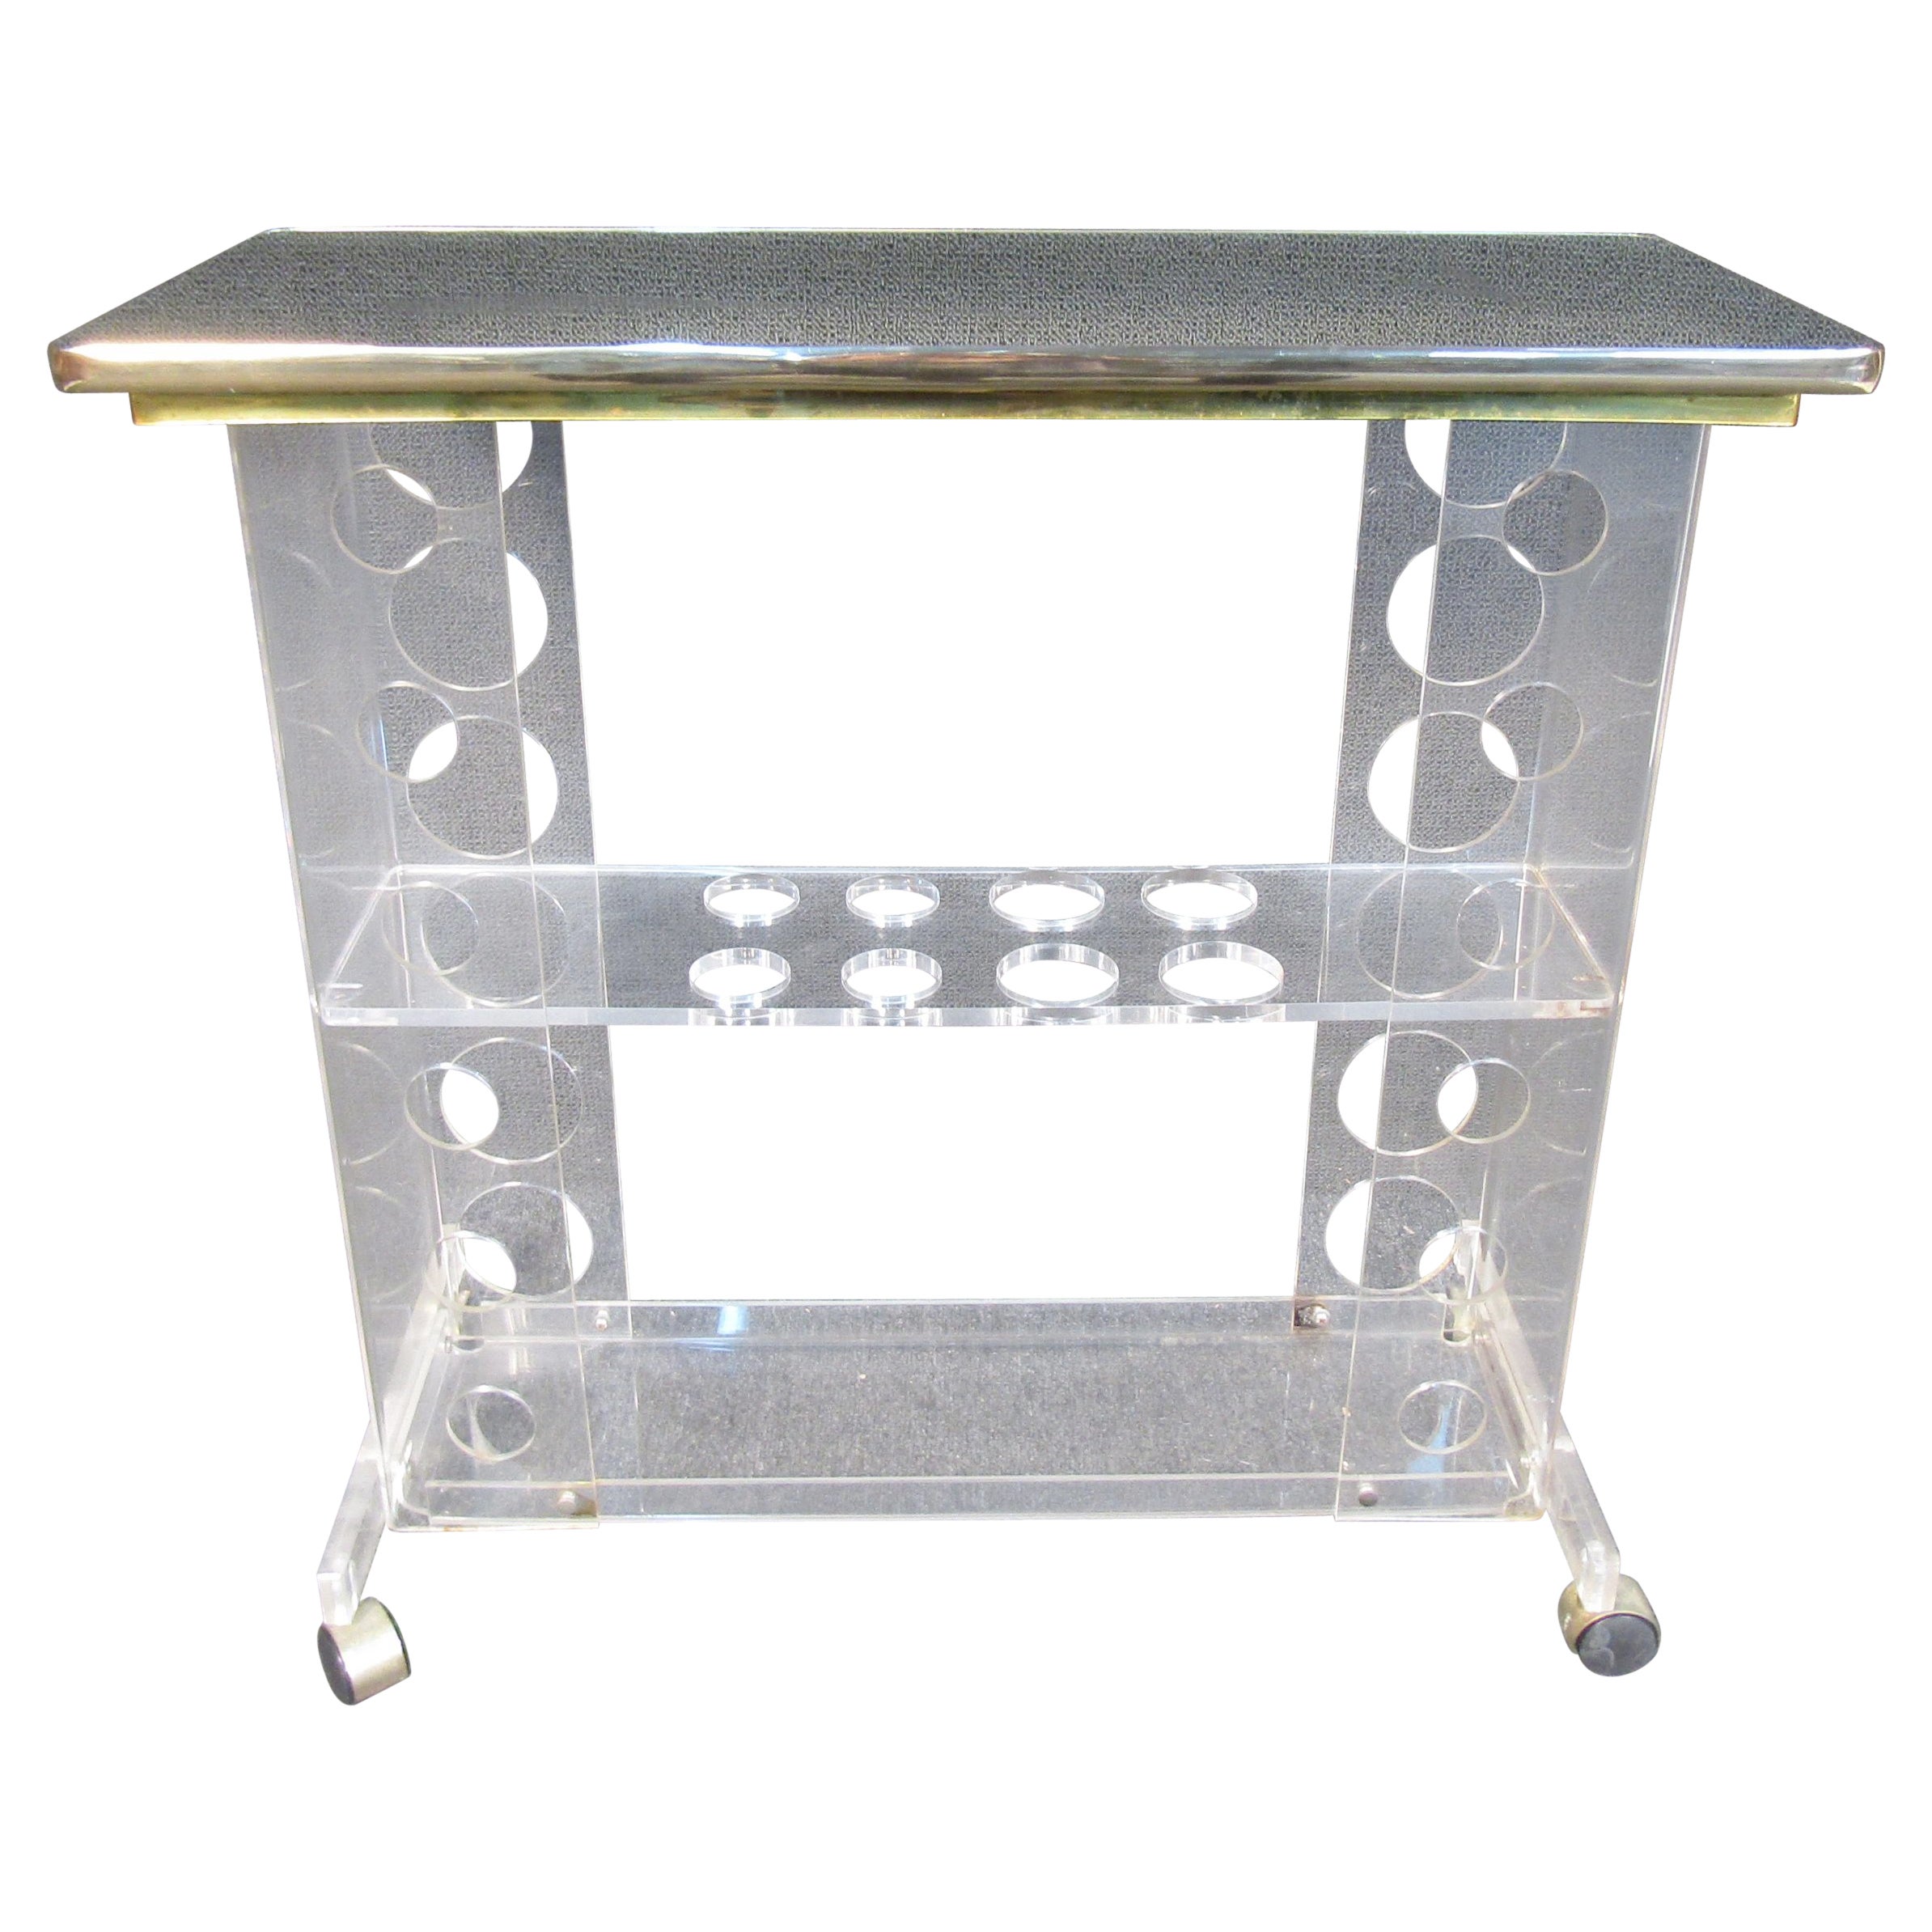 Three Tier Lucite Bar Cart with Mirrored Top